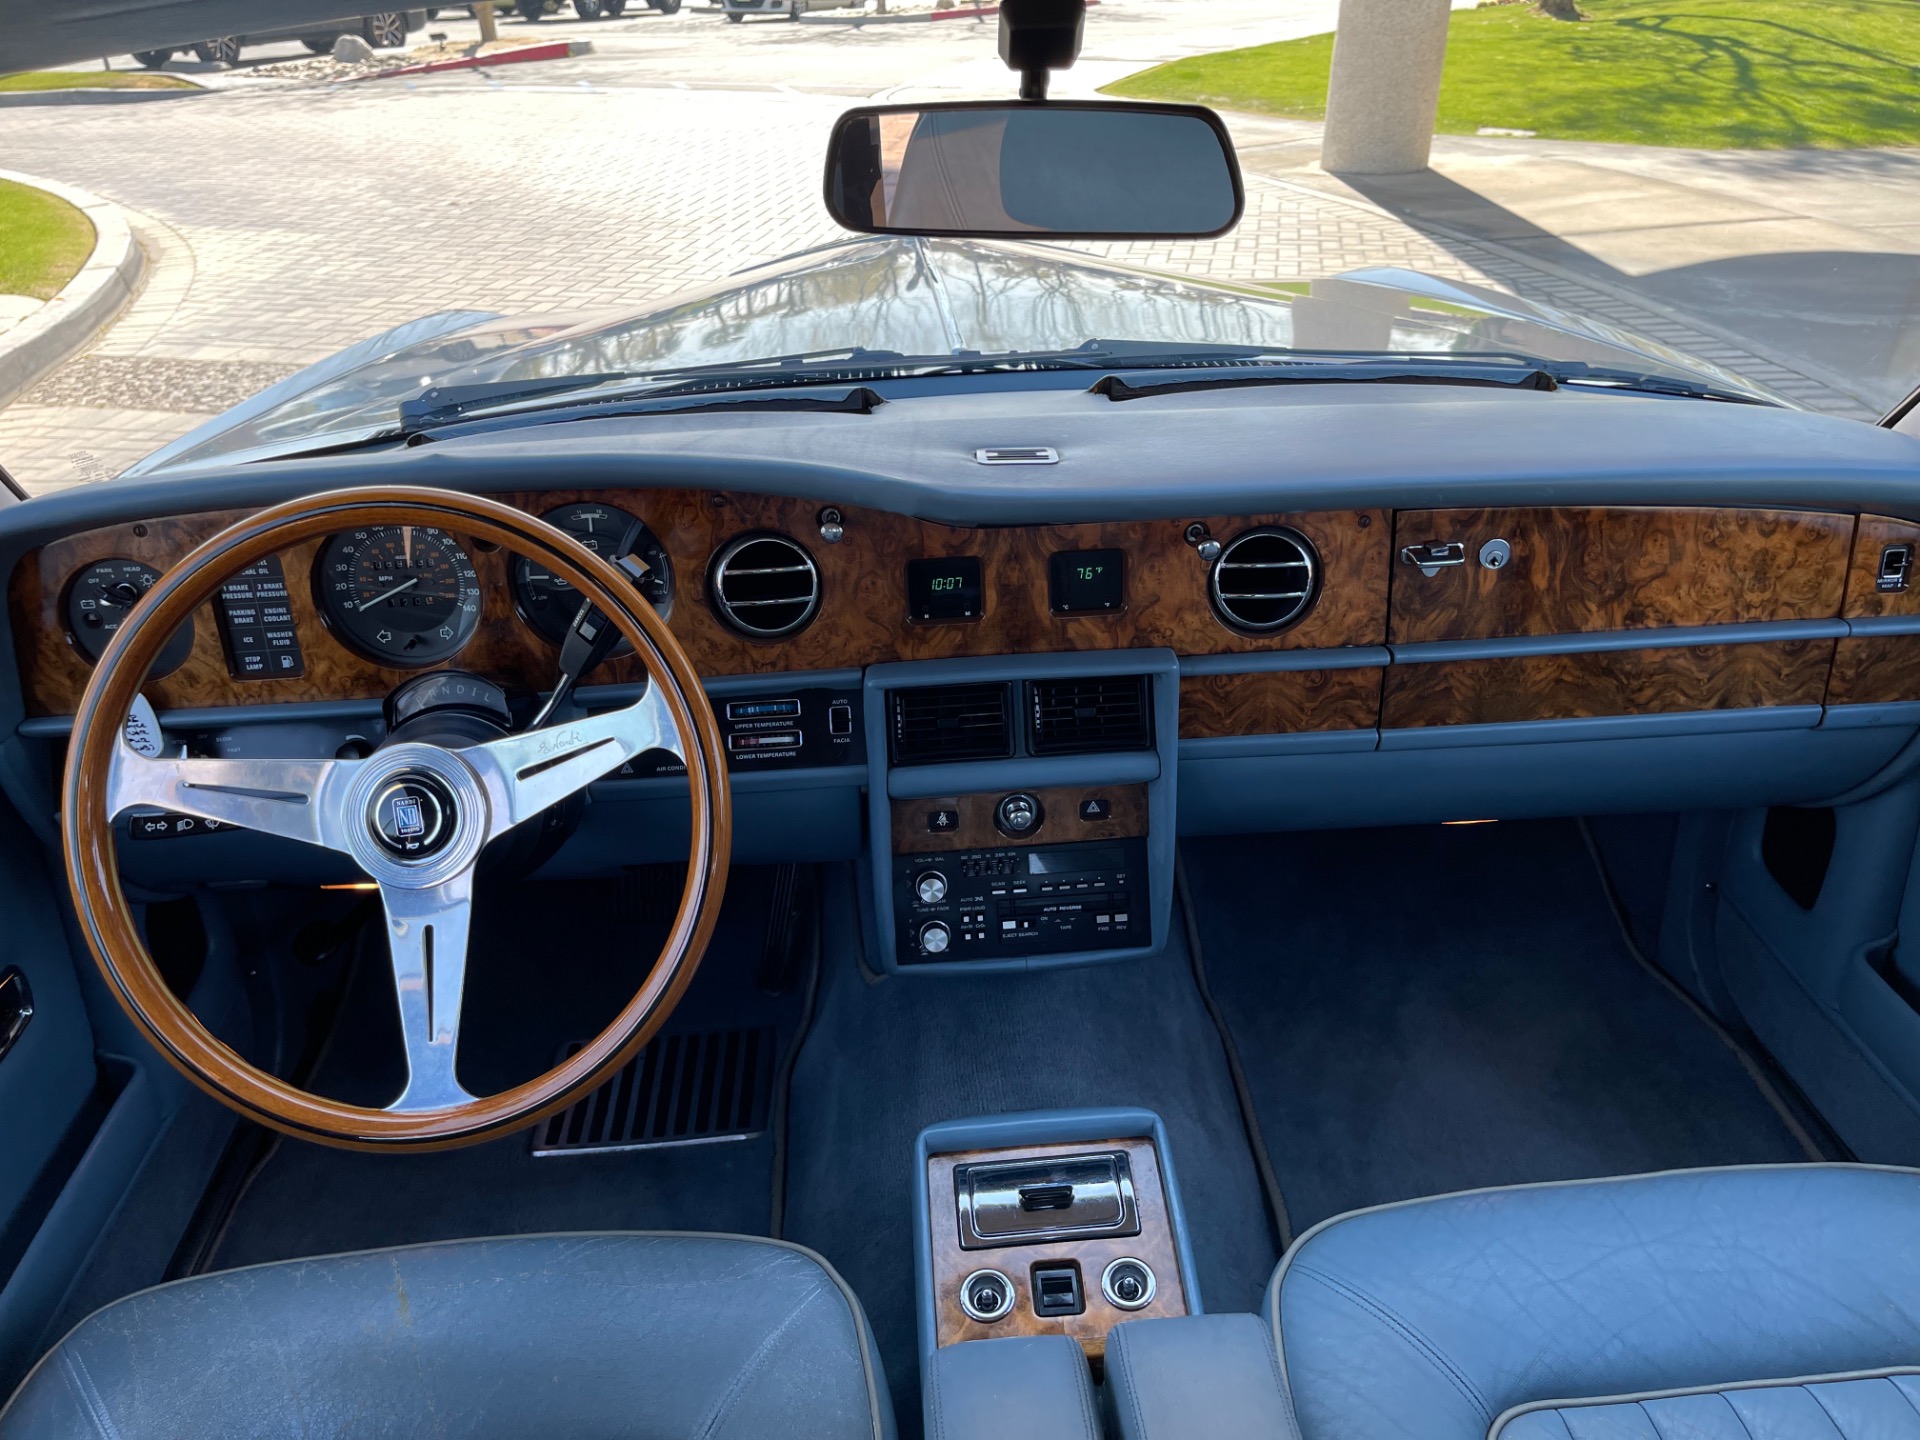 1986 ROLLS ROYCE SILVER SPUR for sale by owner  Fox Lake WI  craigslist